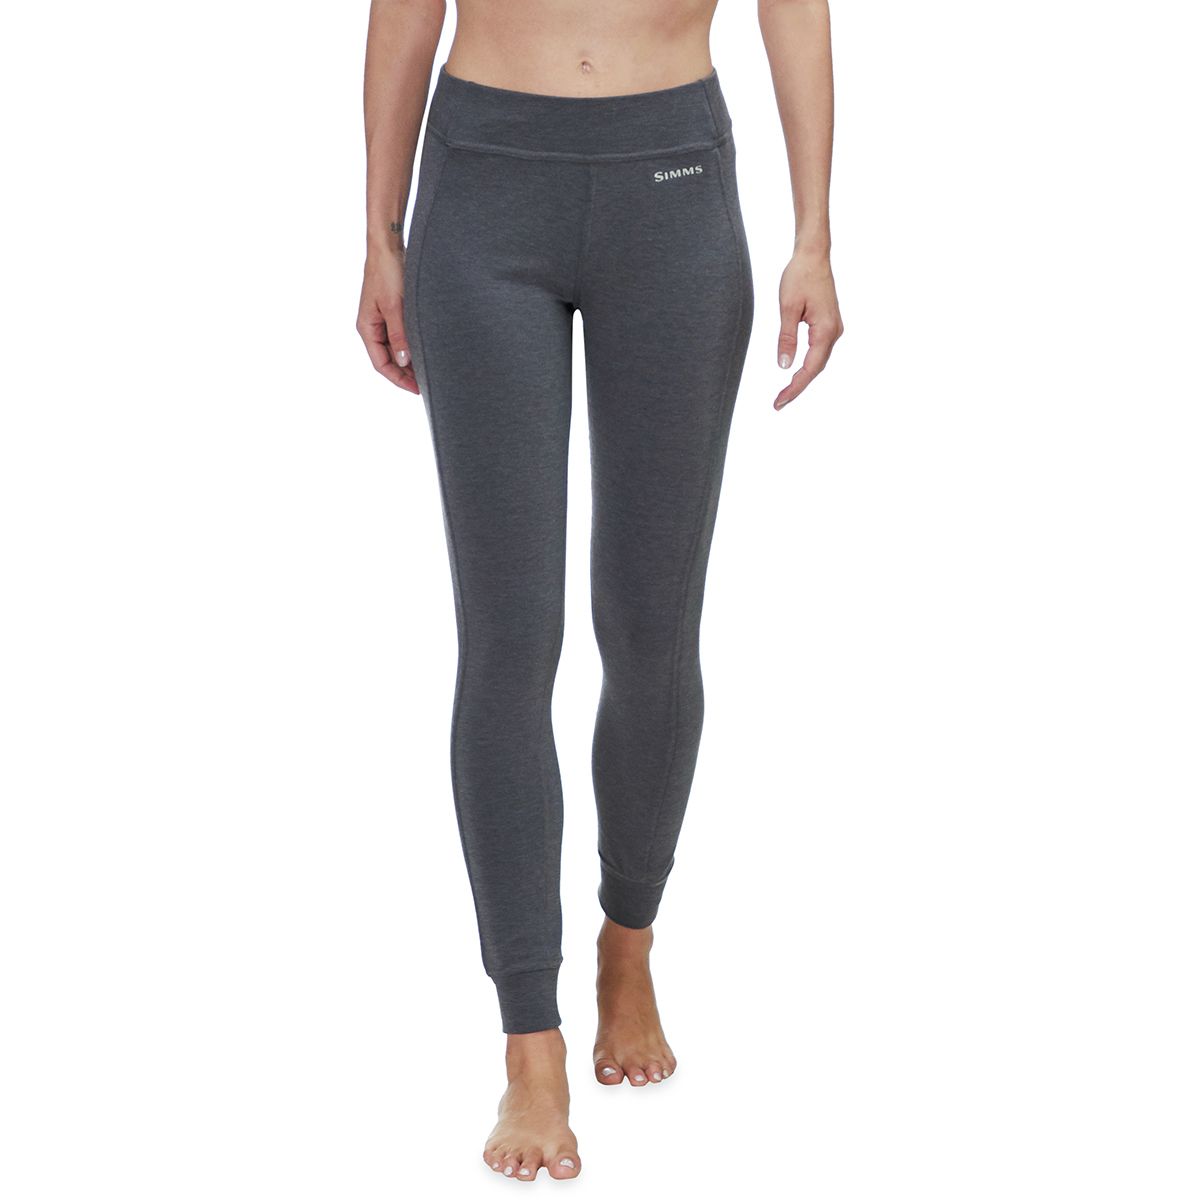 Simms Coldweather Pant - Women's